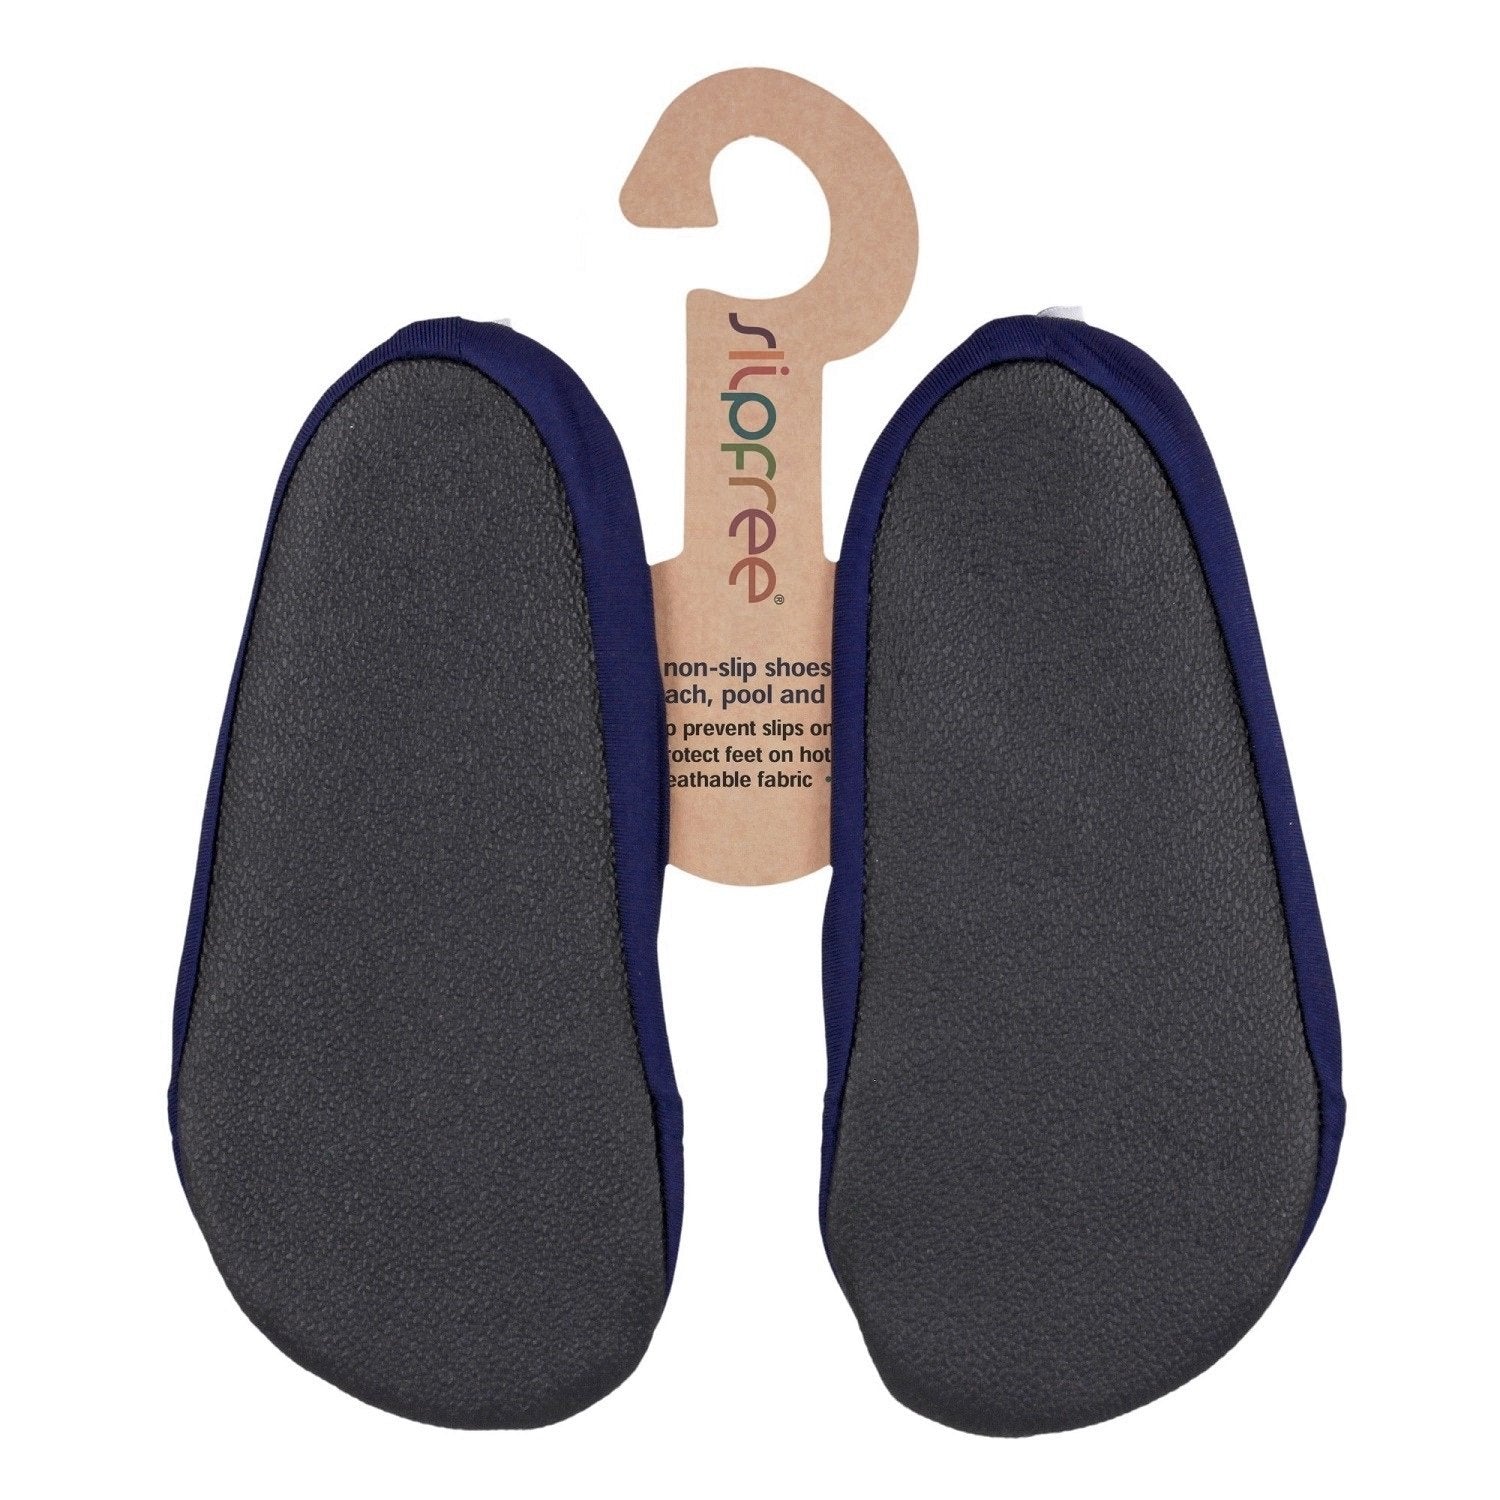 Slipfree Navy Unisex Beach and Pool Shoes